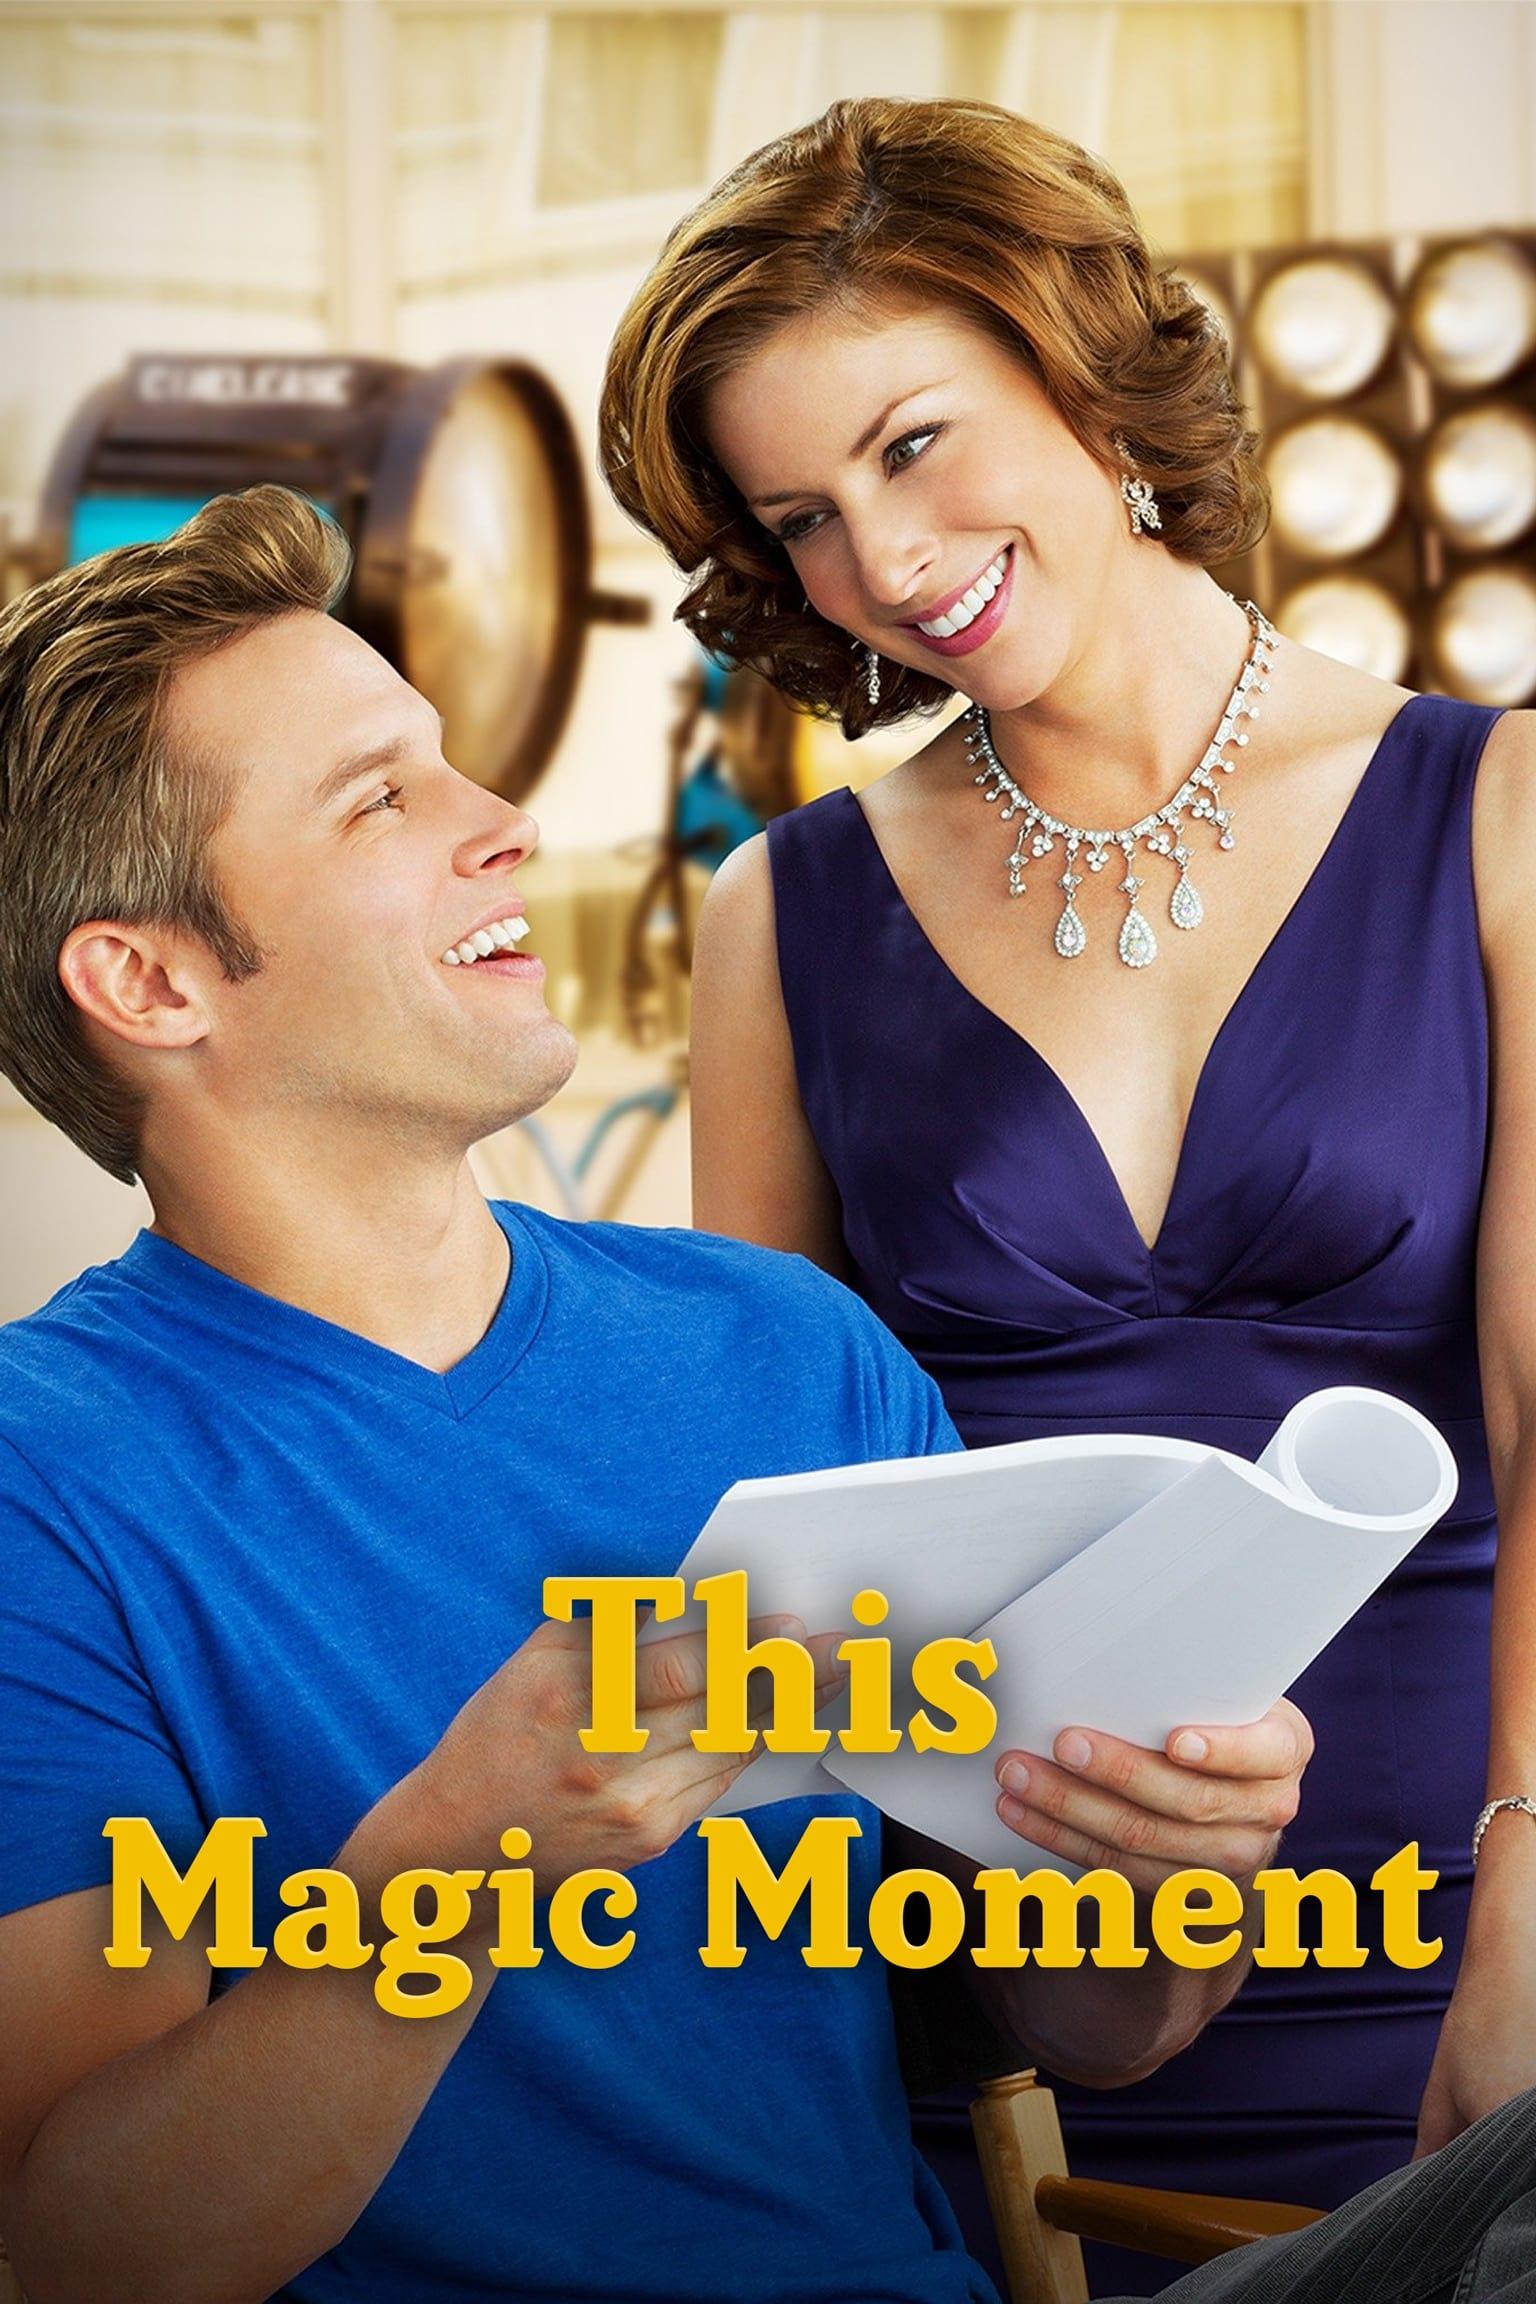 This Magic Moment poster